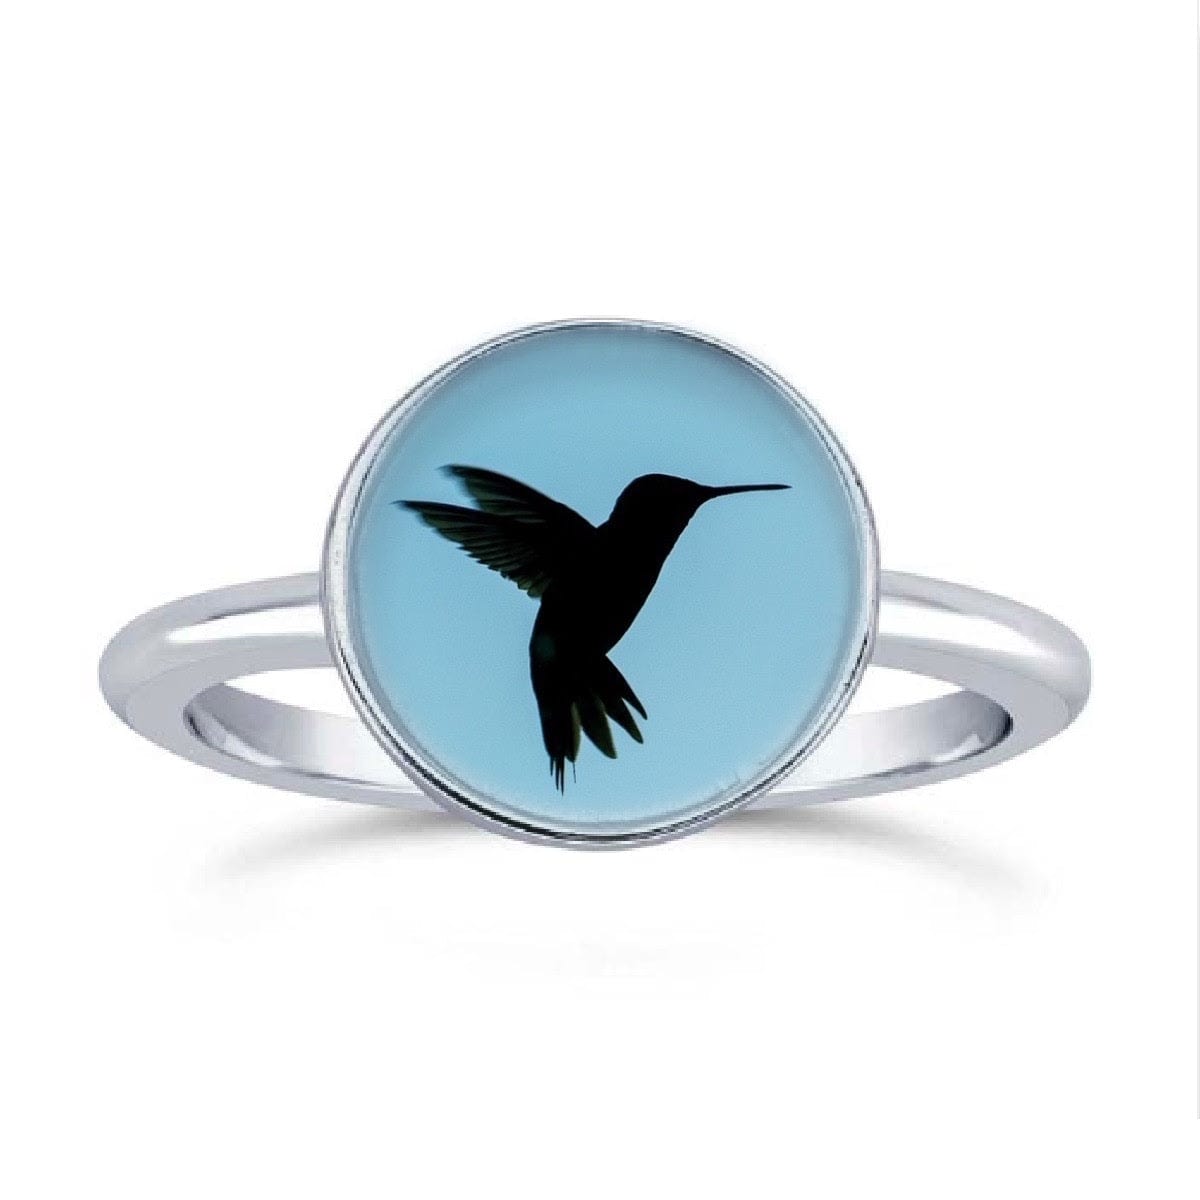 Hummingbird Ring by Roxanne Collins